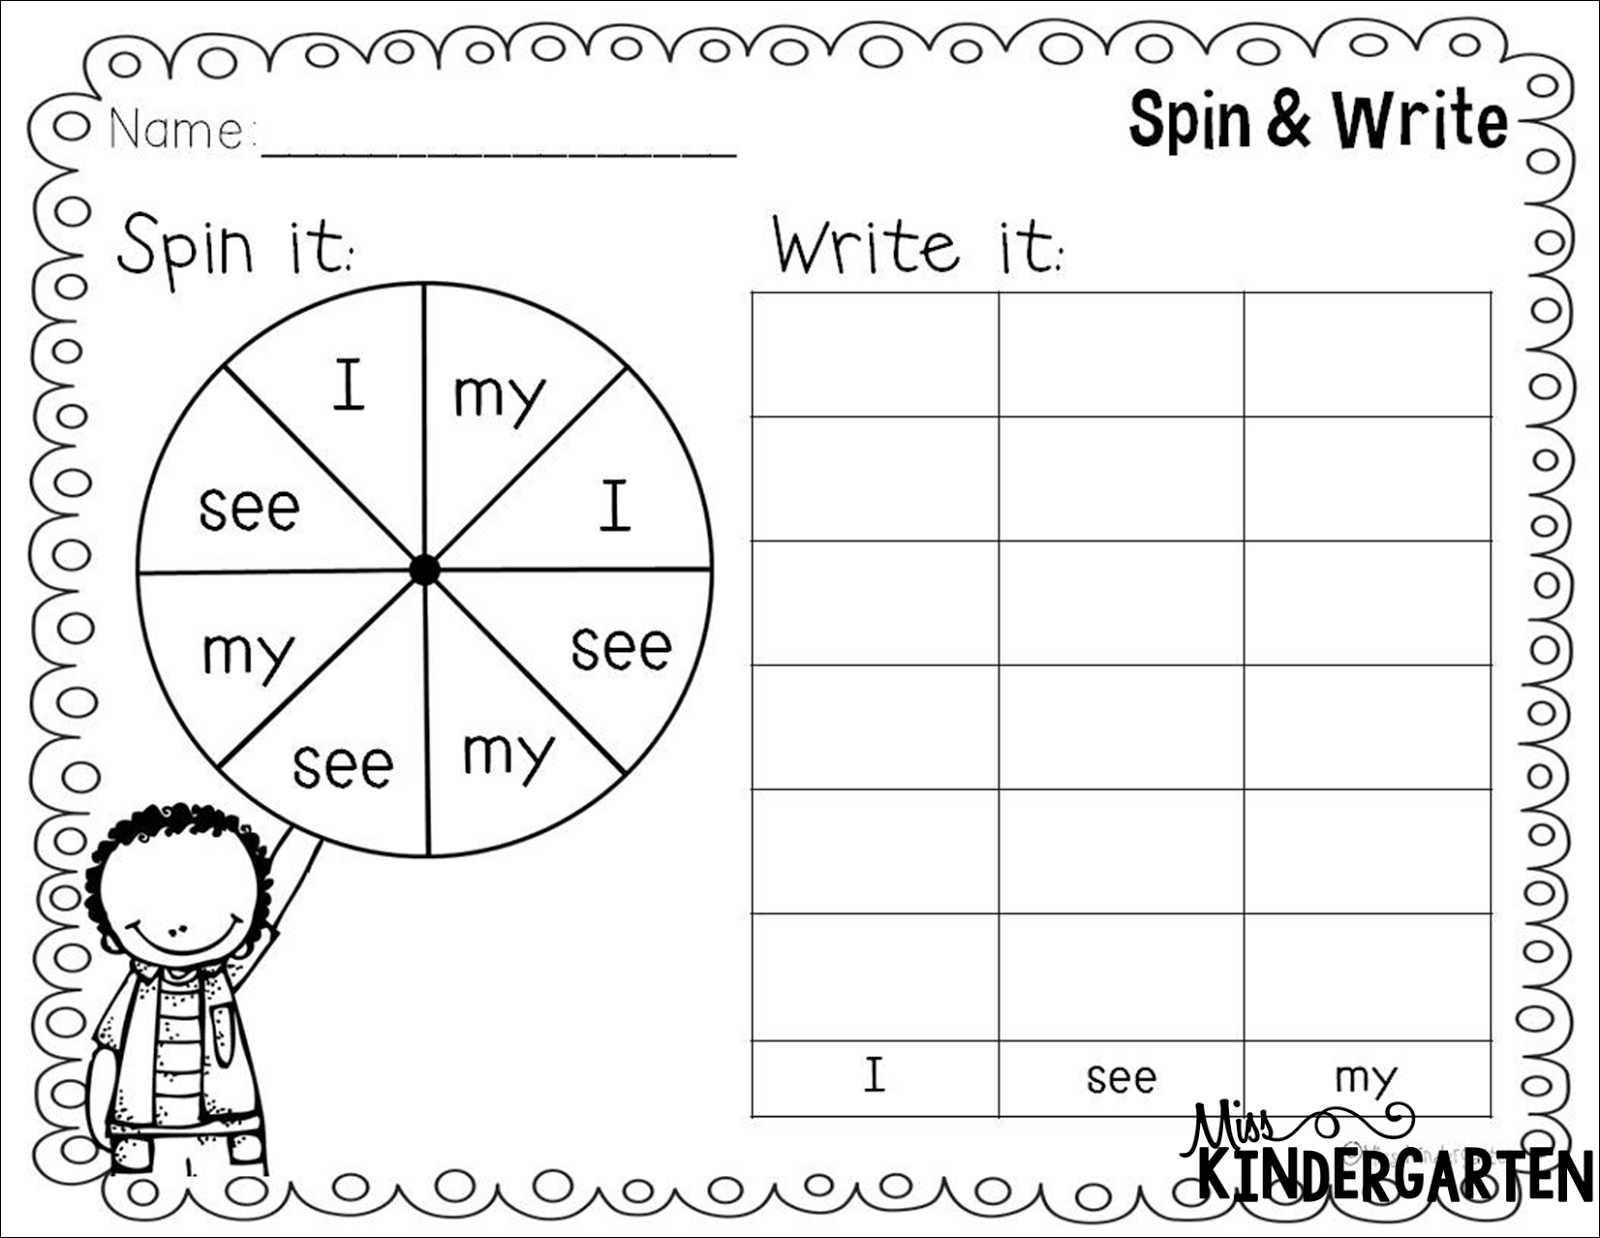 Number Writing Practice Worksheets together with Kindergarten Sight Word Practice Spin and Kindergarten Free